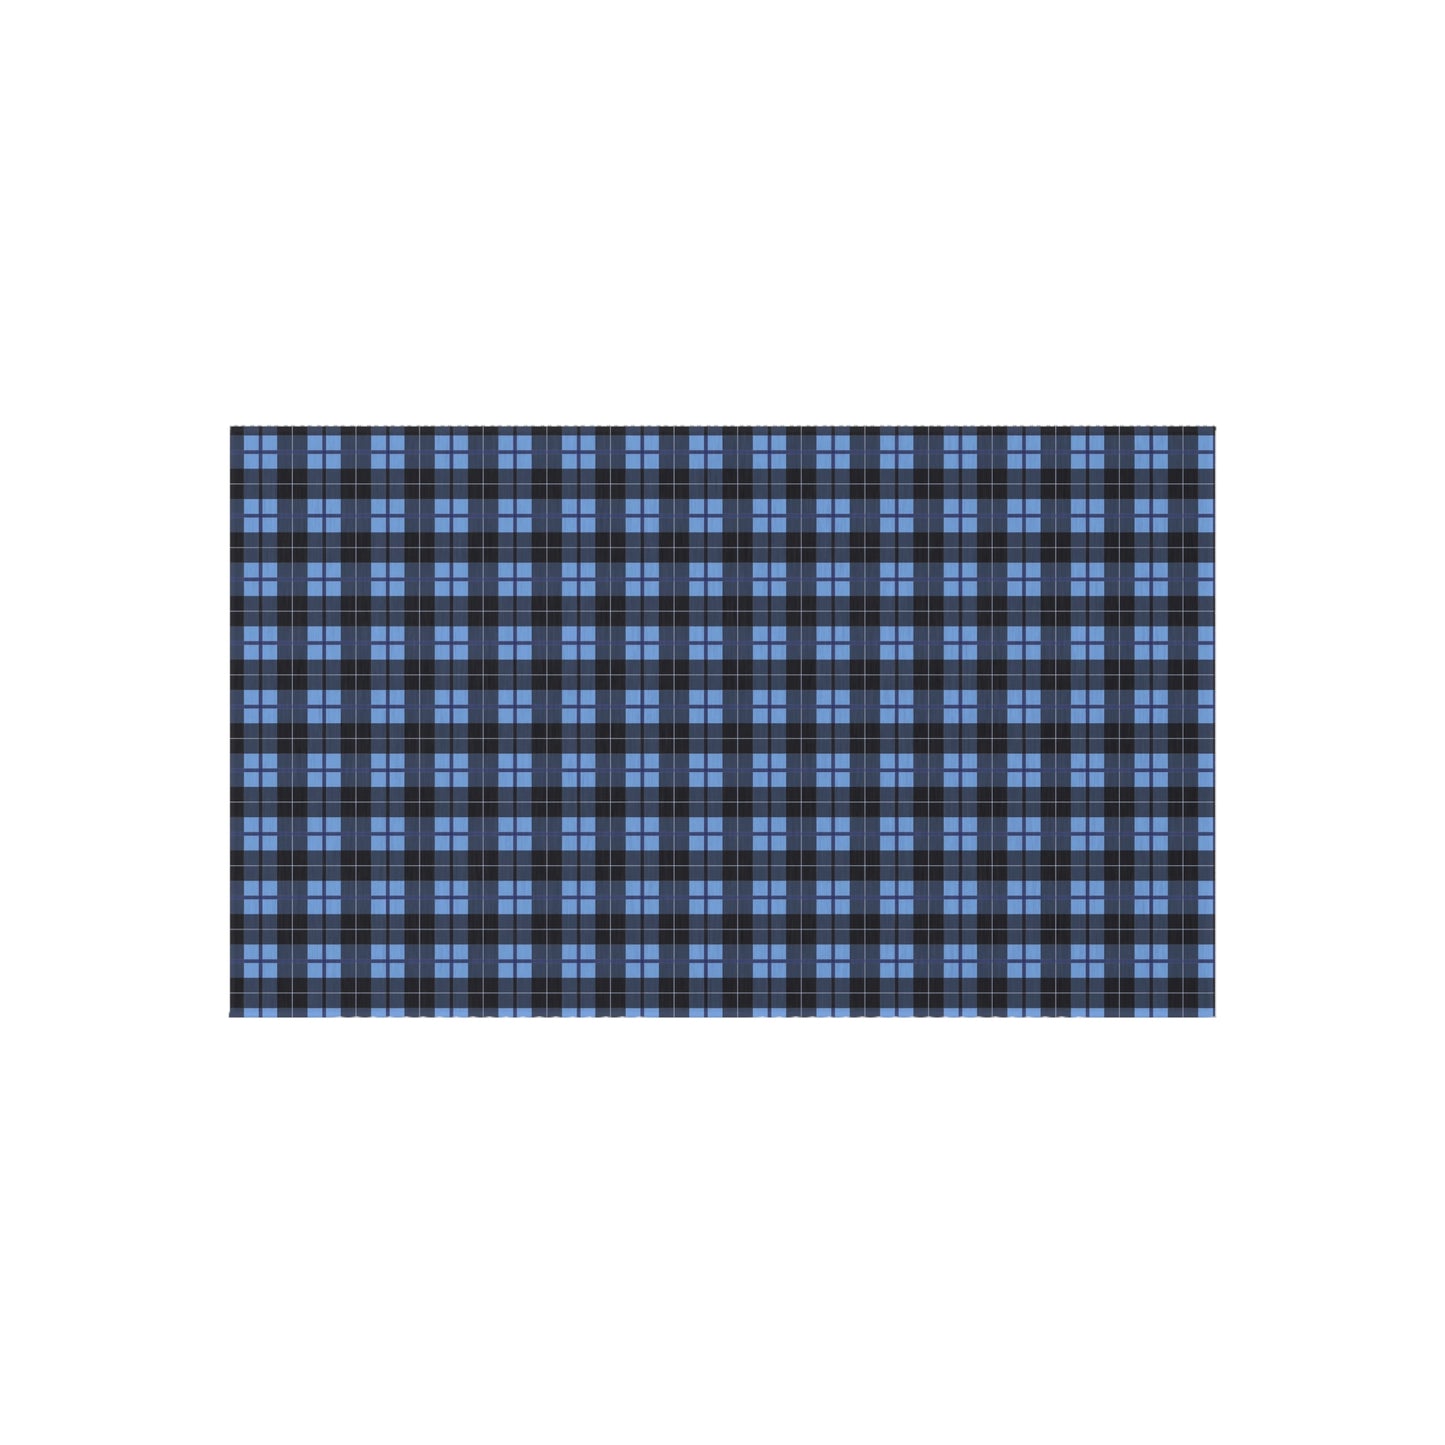 Blue Plaid Outdoor Area Rug, Check Waterproof Carpet Home Floor Decor Large 2x3 4x6 3x5 5x7 9x10 Patio Small Large Camping Mat Starcove Fashion